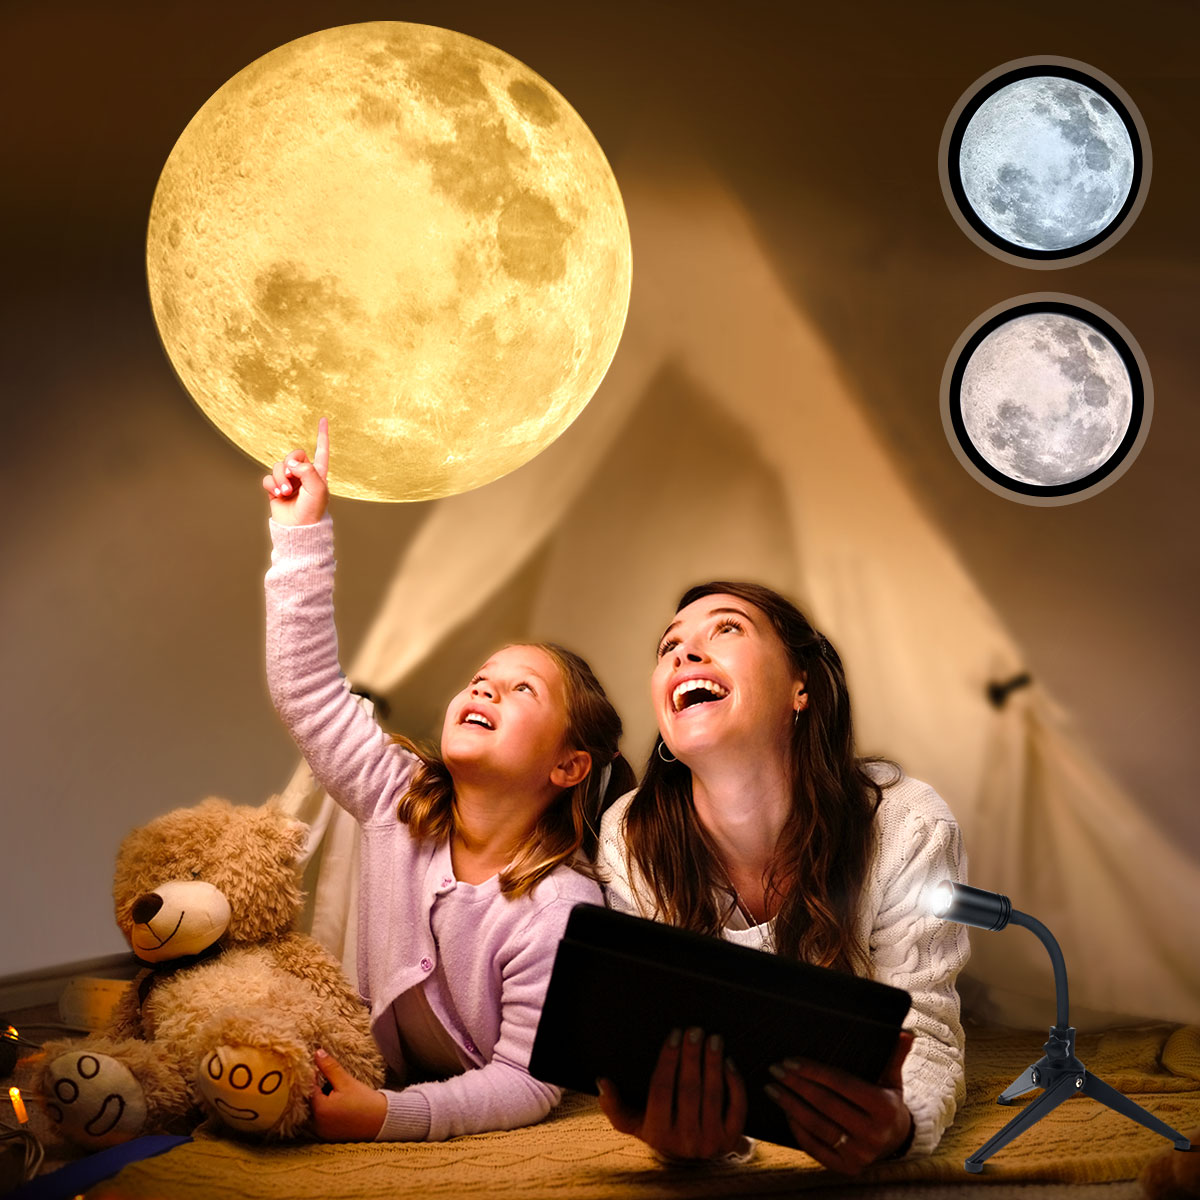 Moon　Projector　Gifts　Lights,　for　for　Lamp　Modes,　Three　Lovers　Brightness　Projection　Moon　Moon　Kids,　No-Fade　360°　Adults,　-HD　Adjustable　Projector　with　bedroom　Moon　Tanbaby　Light　Moon　Galaxy　Light